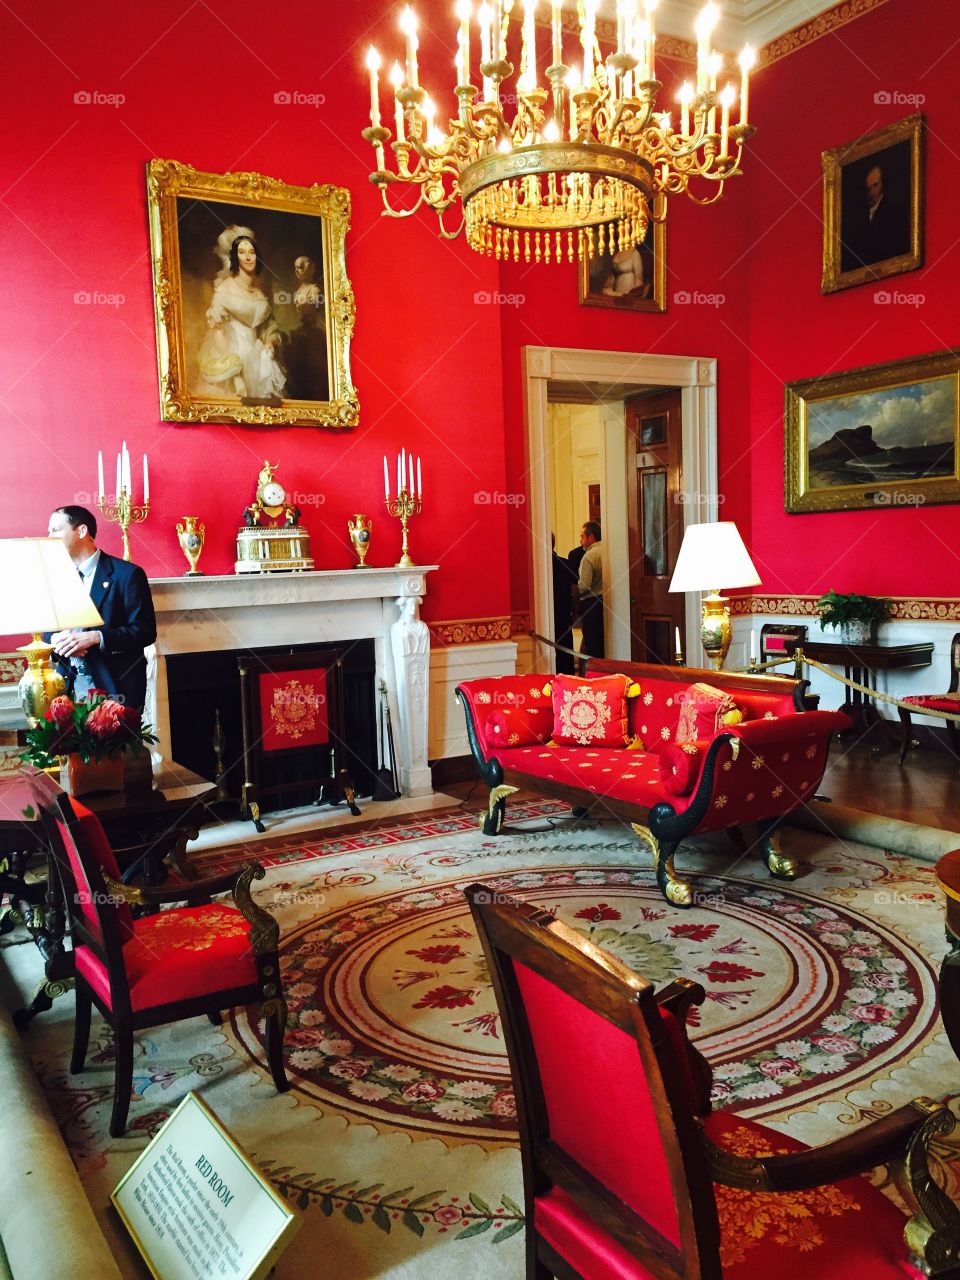 The White House Red Room